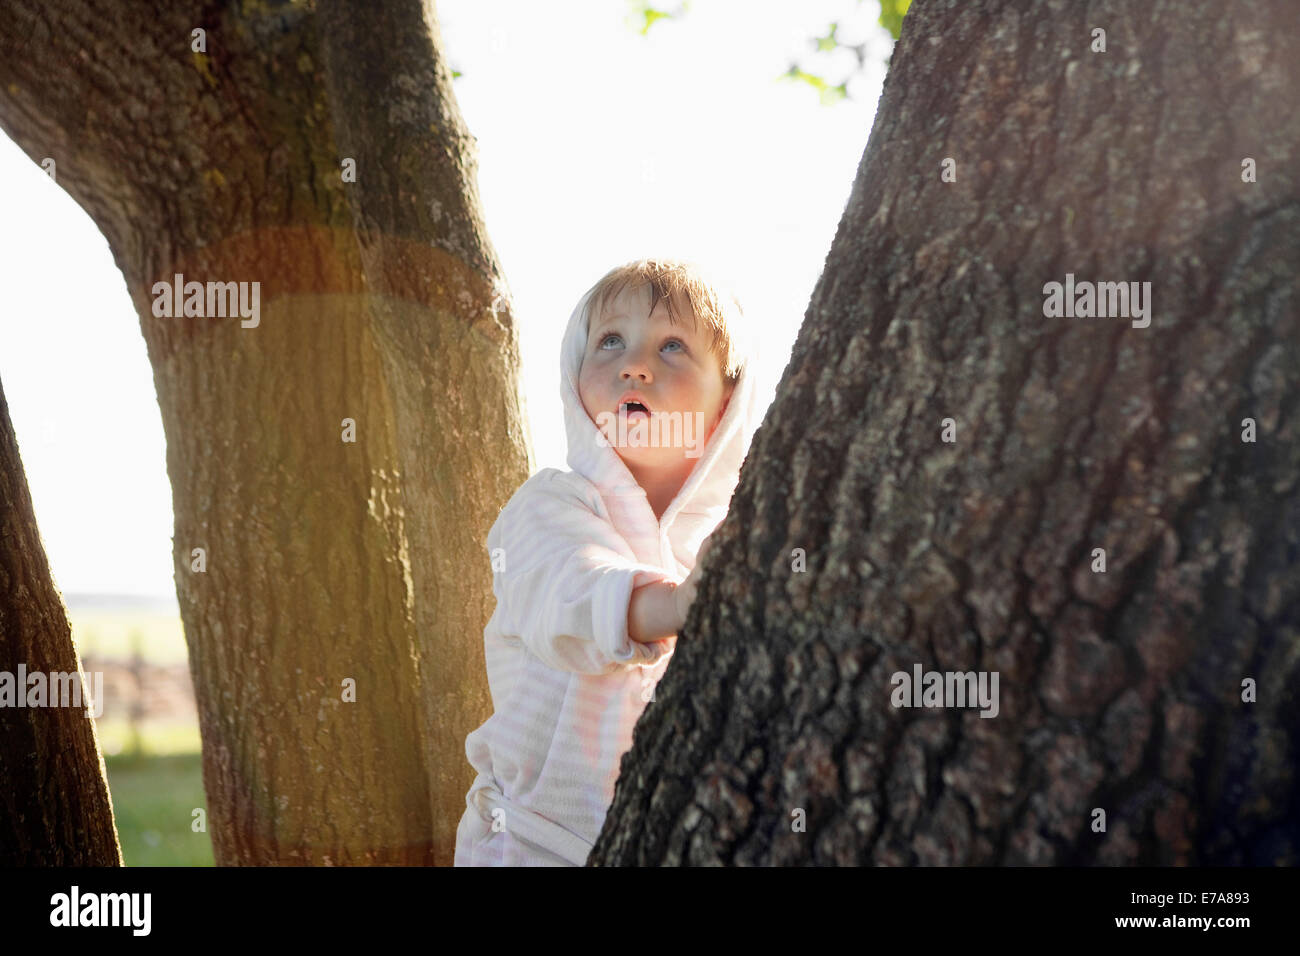 A young girl leaning on a tree trunk and looking up in wonder Stock Photo